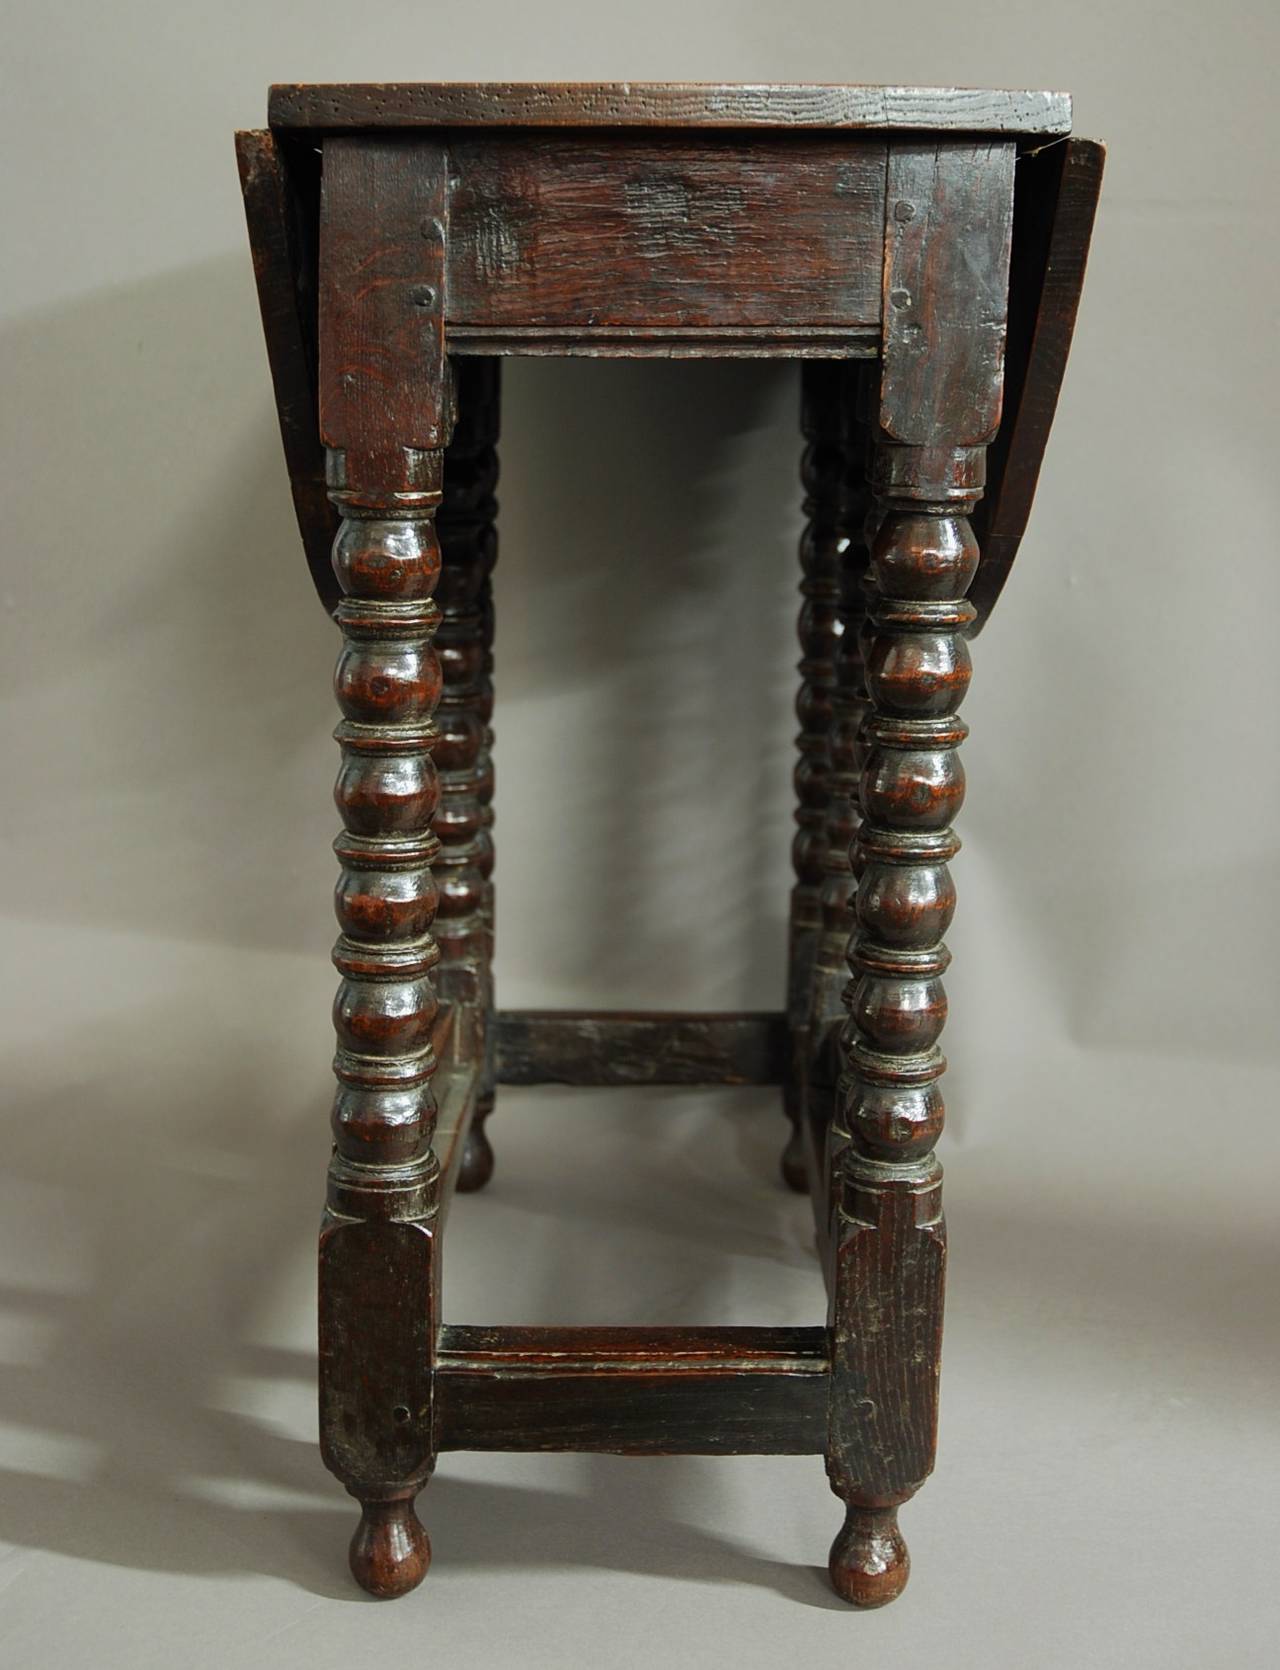 Great Britain (UK) Rare 17th Century Gateleg Table of Small Proportions